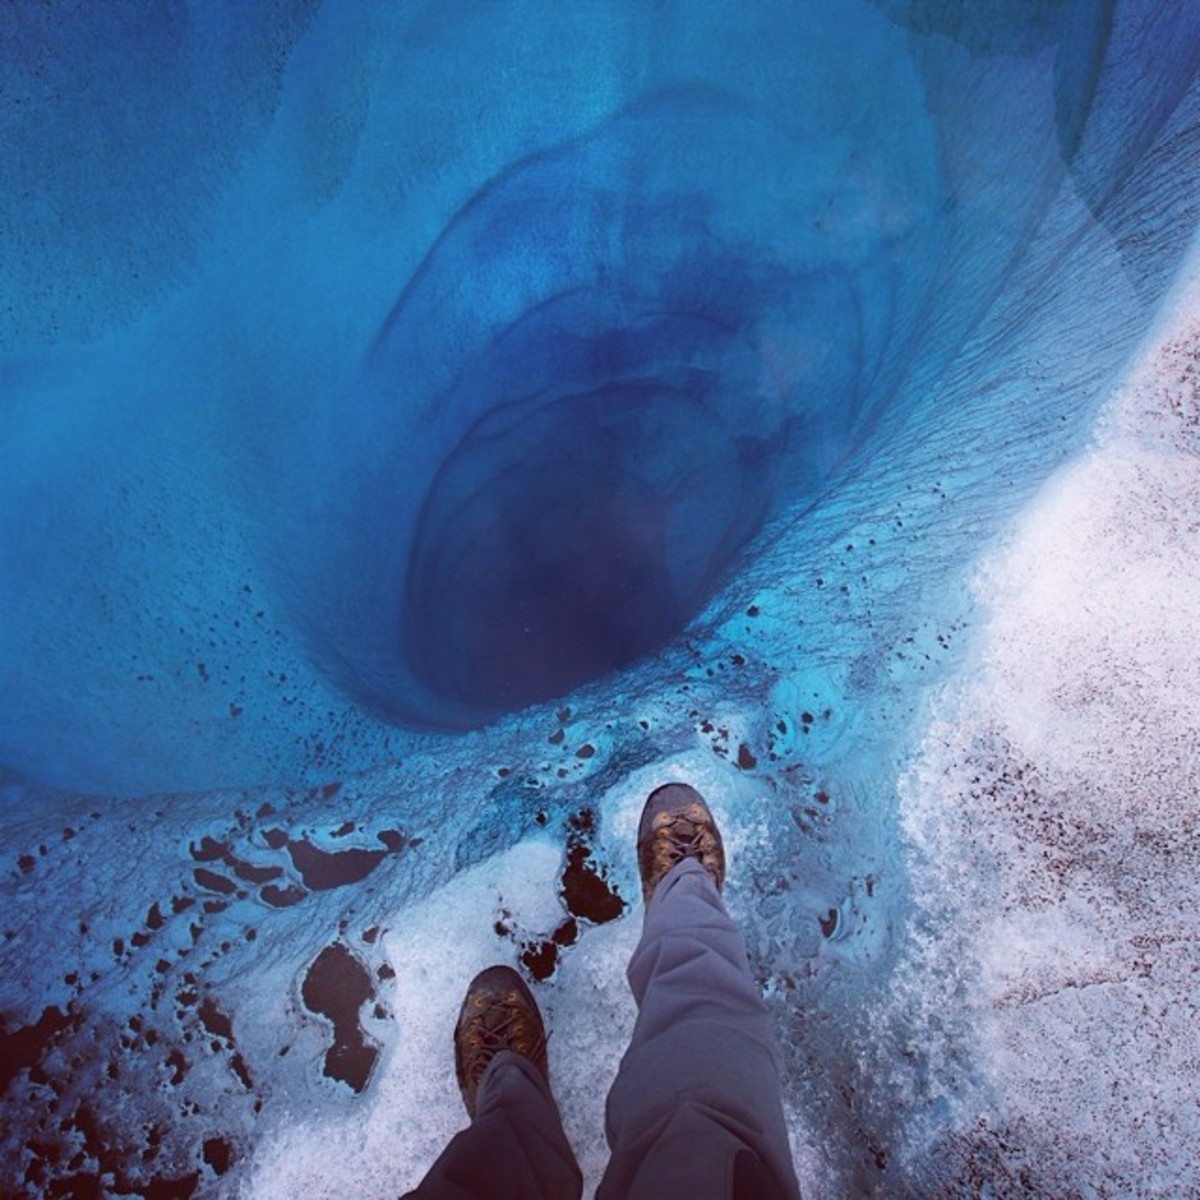 Standing alongside a Ruth Glacier wormhole only looks dangerous. Photo by Aaron Huey from Facebook and Instagram